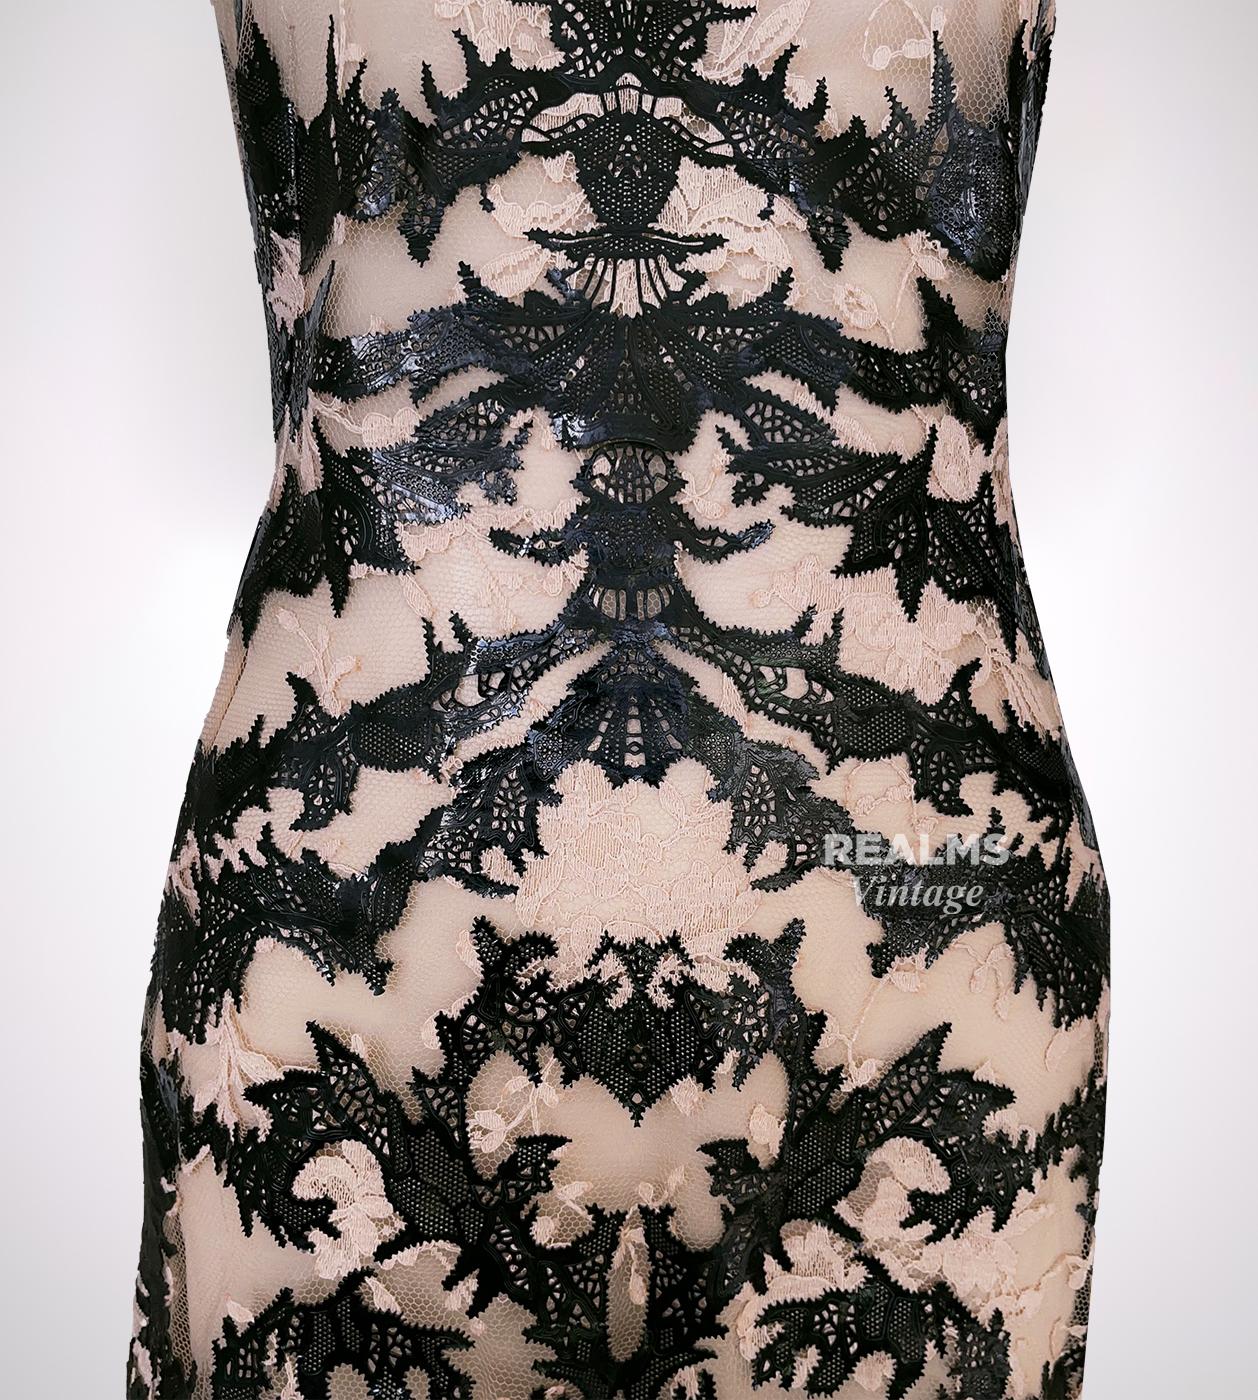 Iconic Archival Alexander McQueen SS 2012 Laser Cut Silk Lace Dress In Good Condition For Sale In Berlin, BE